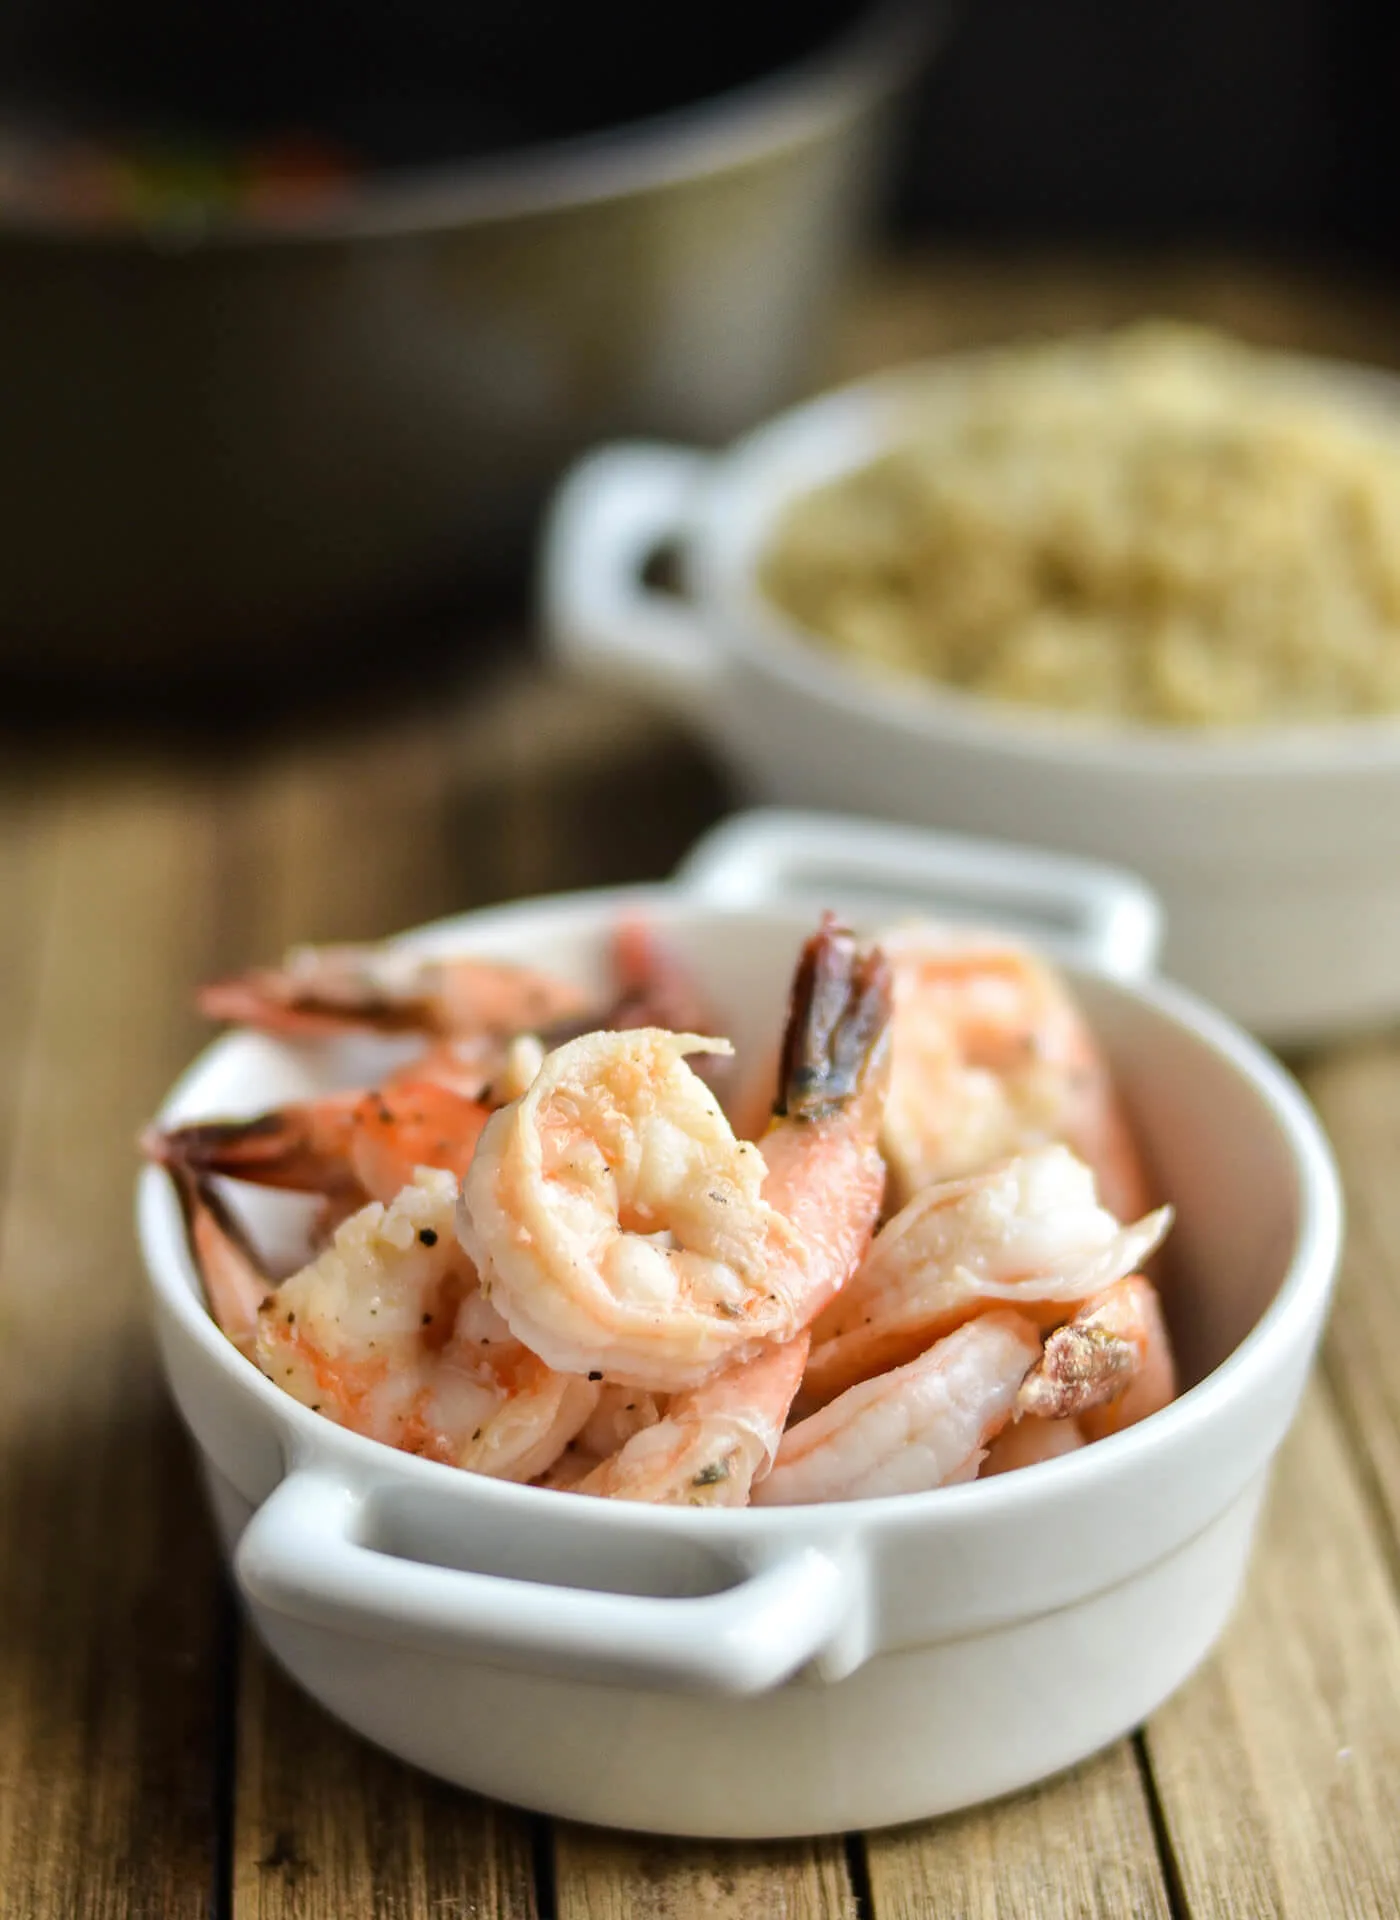 Uncooked, cleaned shrimp in a ceramic bowl